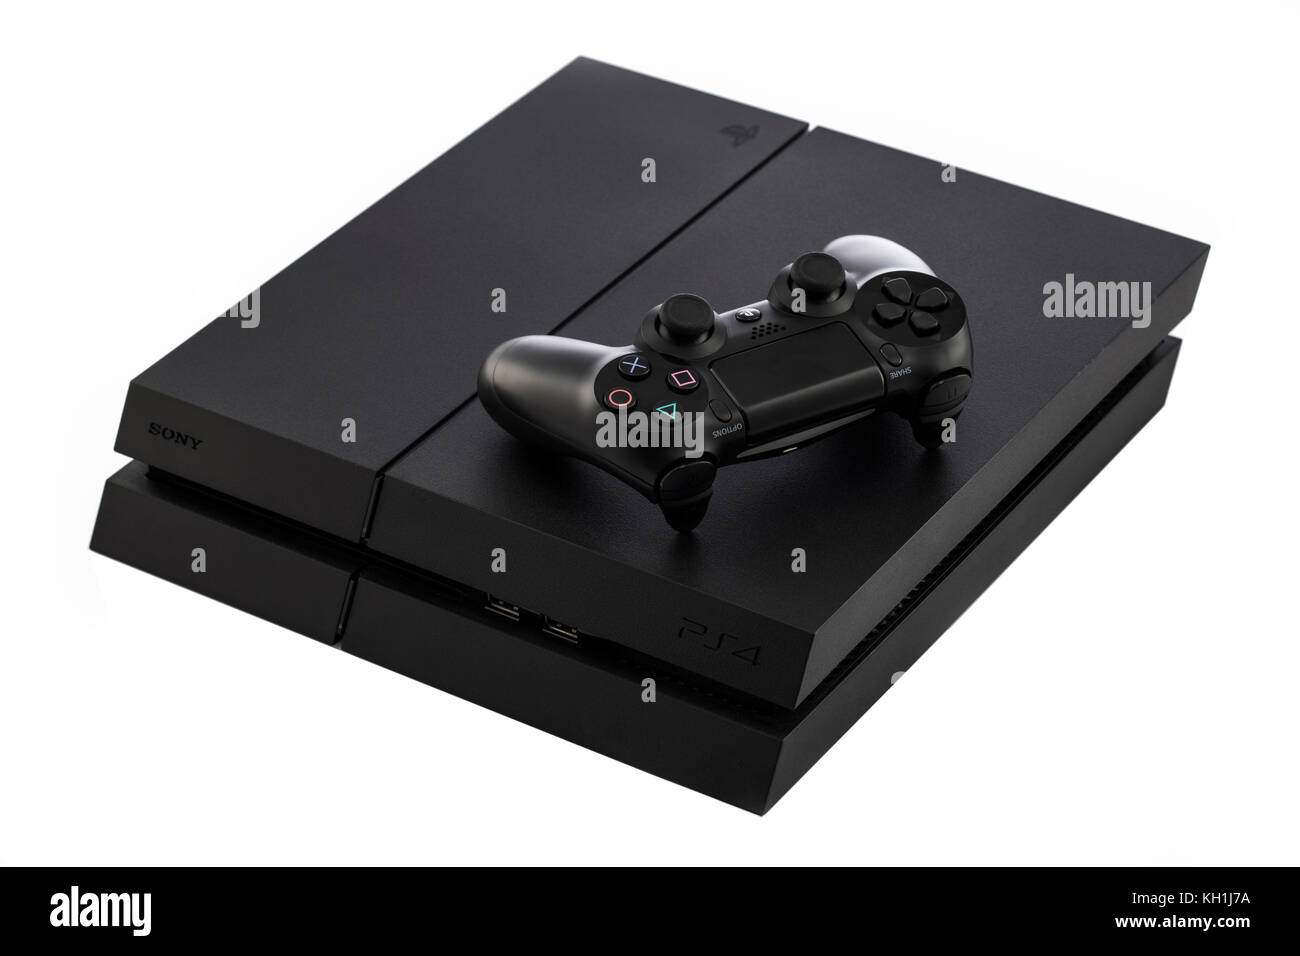 VARNA, Bulgaria - 18 November, 2016: Sony PlayStation 4 game console is a home video game console developed by Sony Interactive Entertainment. Stock Photo